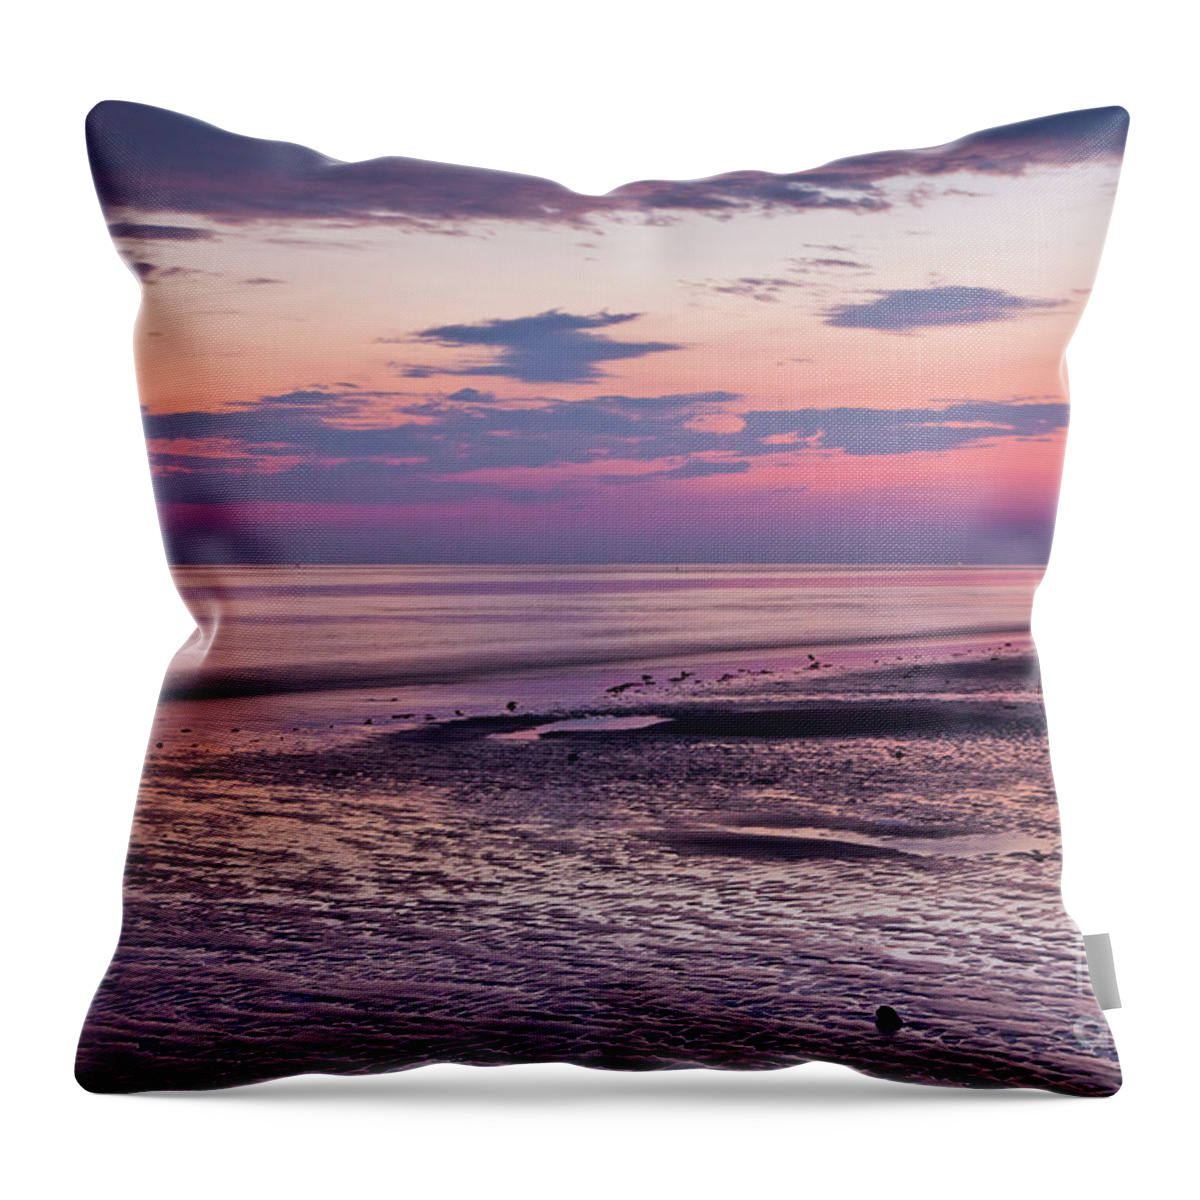 August Throw Pillow featuring the photograph Crane Beach by Susan Cole Kelly